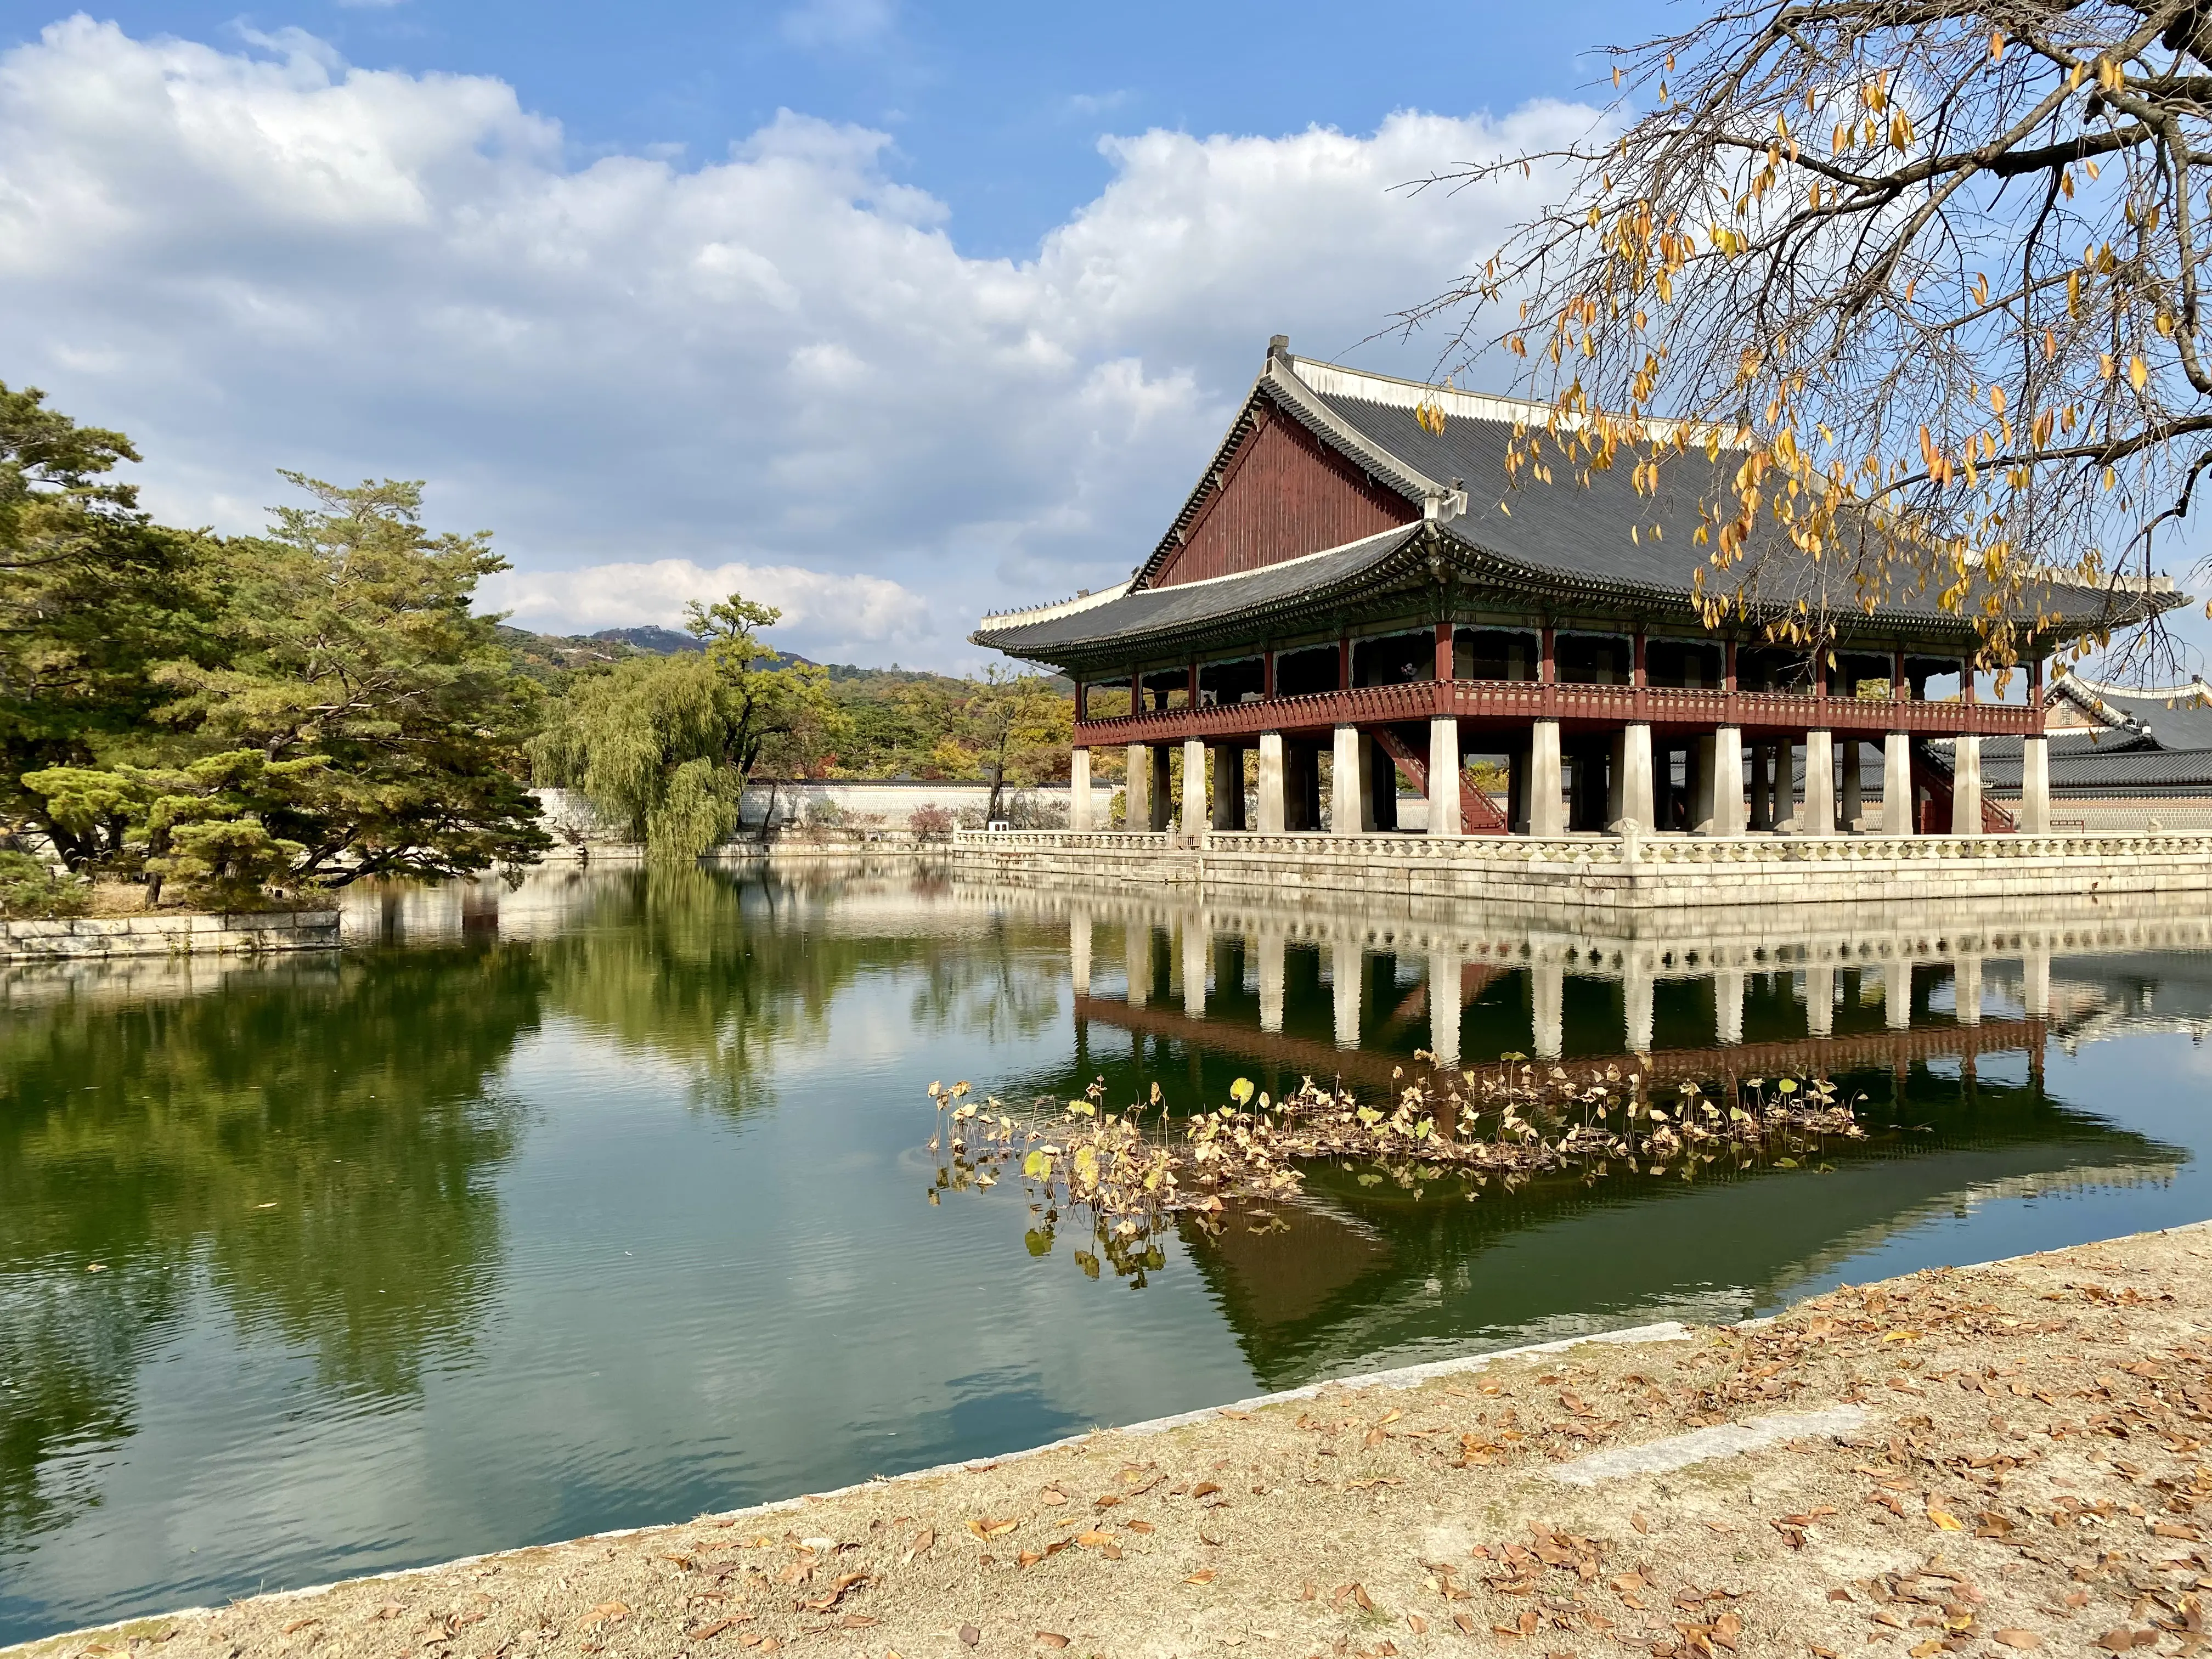 Pond in the Palace, Seoul